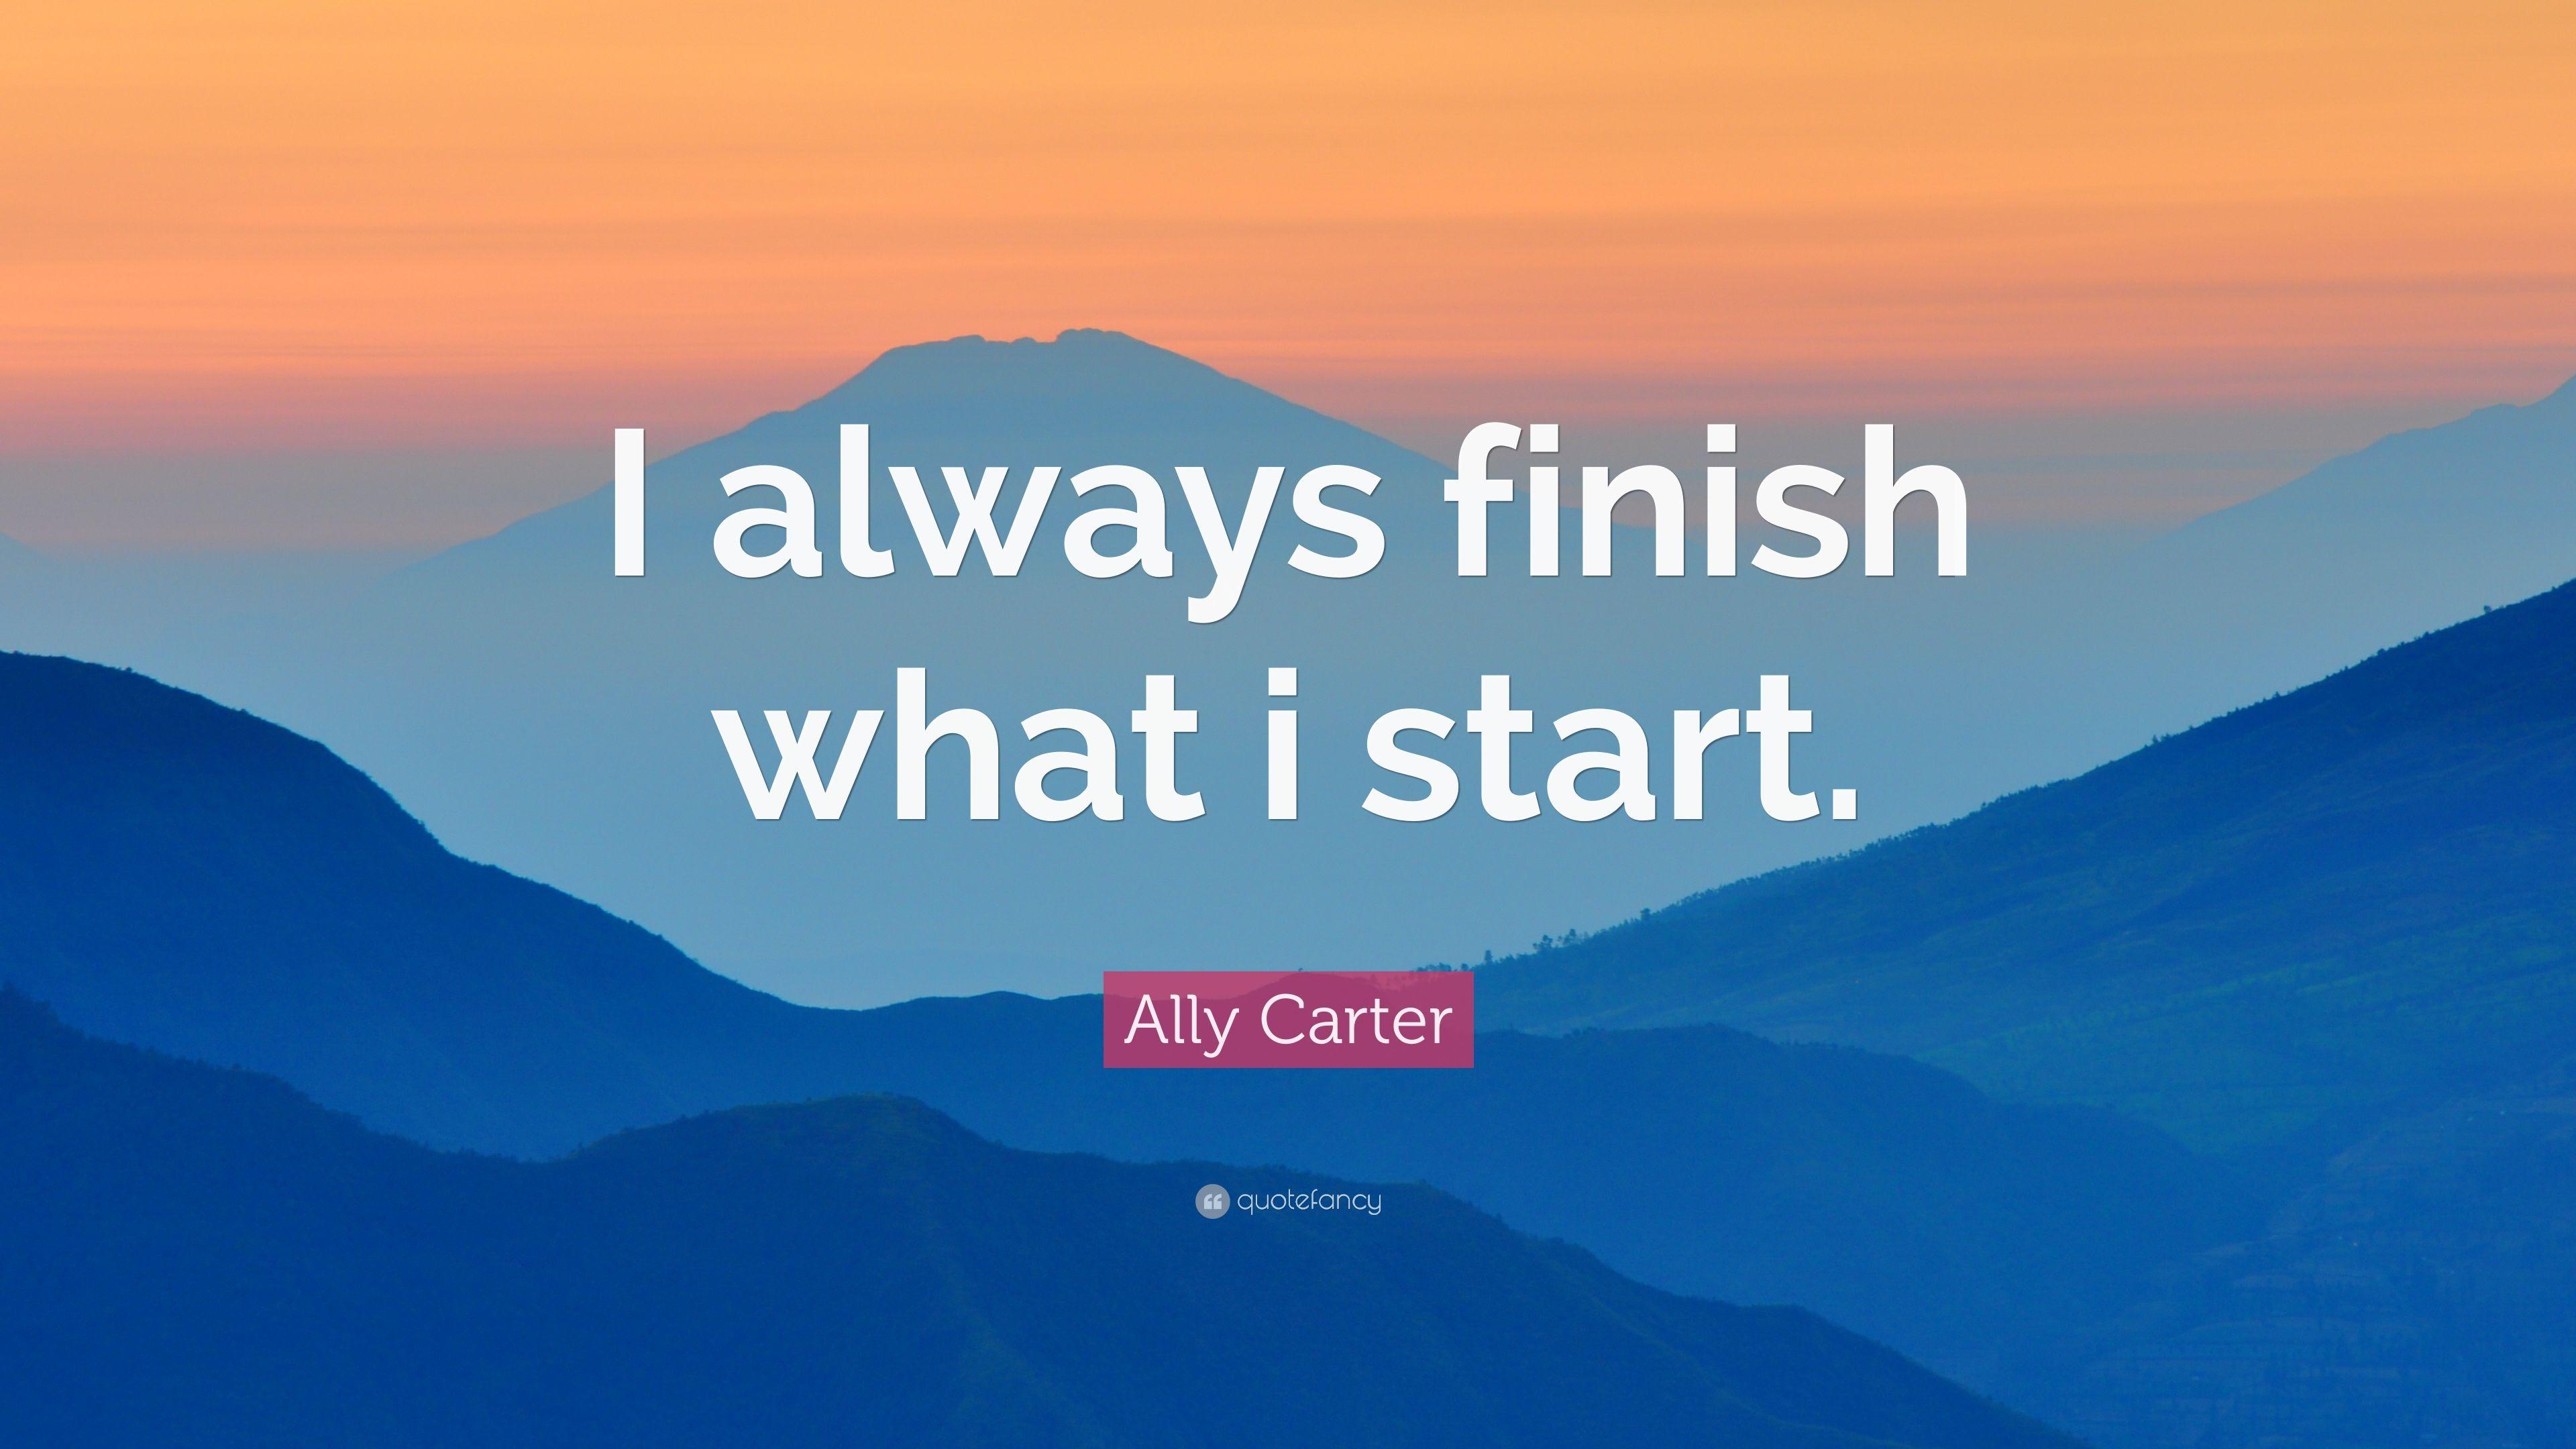 Ally Carter Quote: “I always finish what i start.” 12 wallpaper